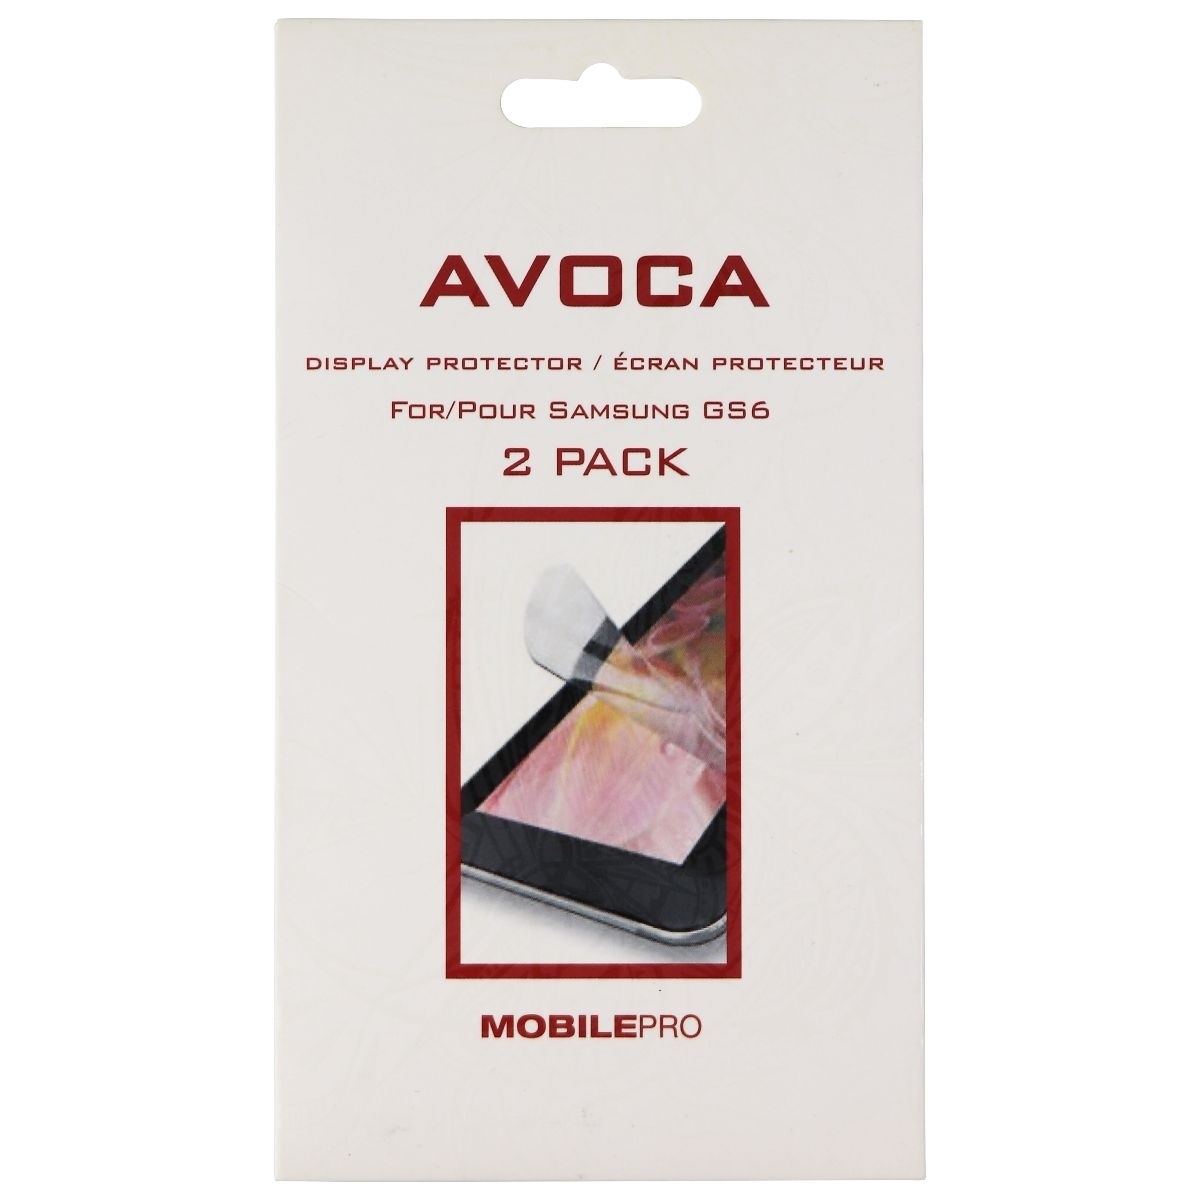 Avoca MobilePro Display Protector 2 Pack For Samsung Galaxy S6 - Clear